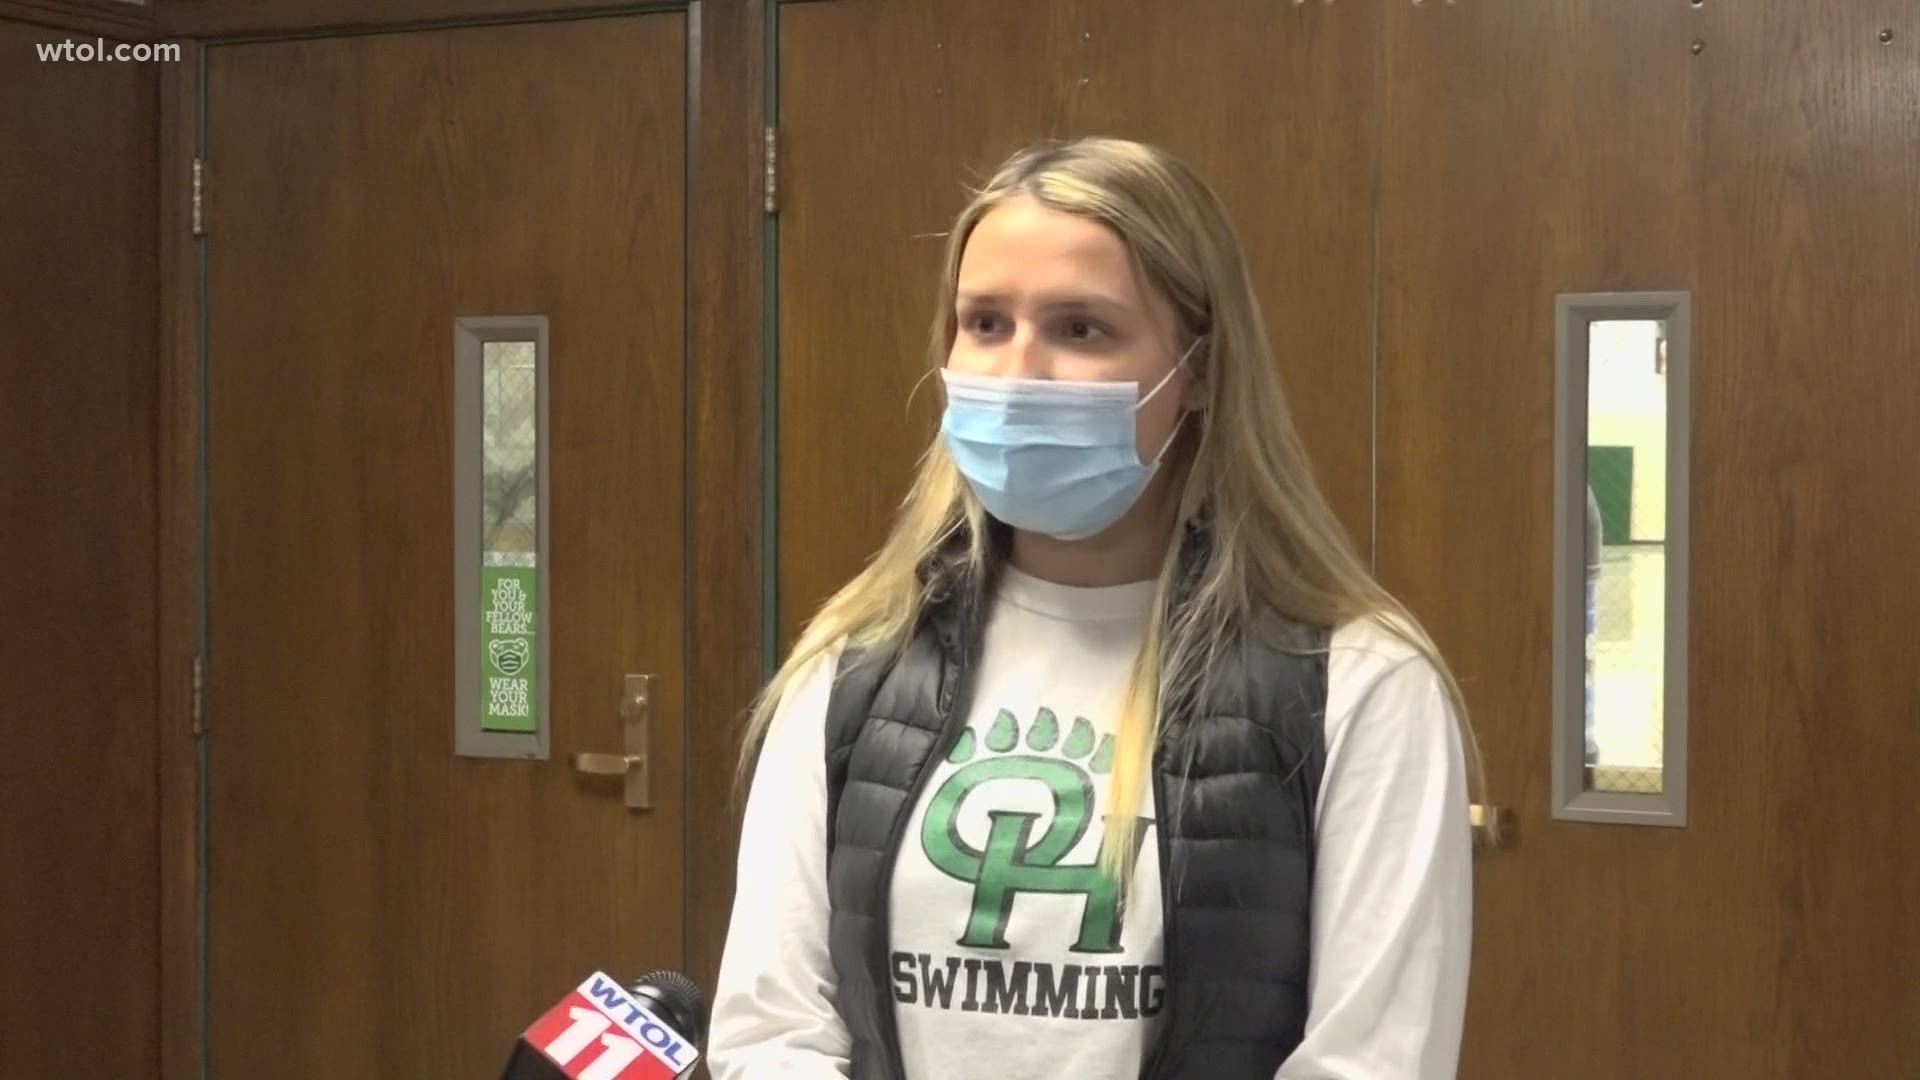 New traditions are replacing the old at Ottawa Hills High School, as students won't be able to hold their annual snowball dance inside due to the ongoing pandemic.